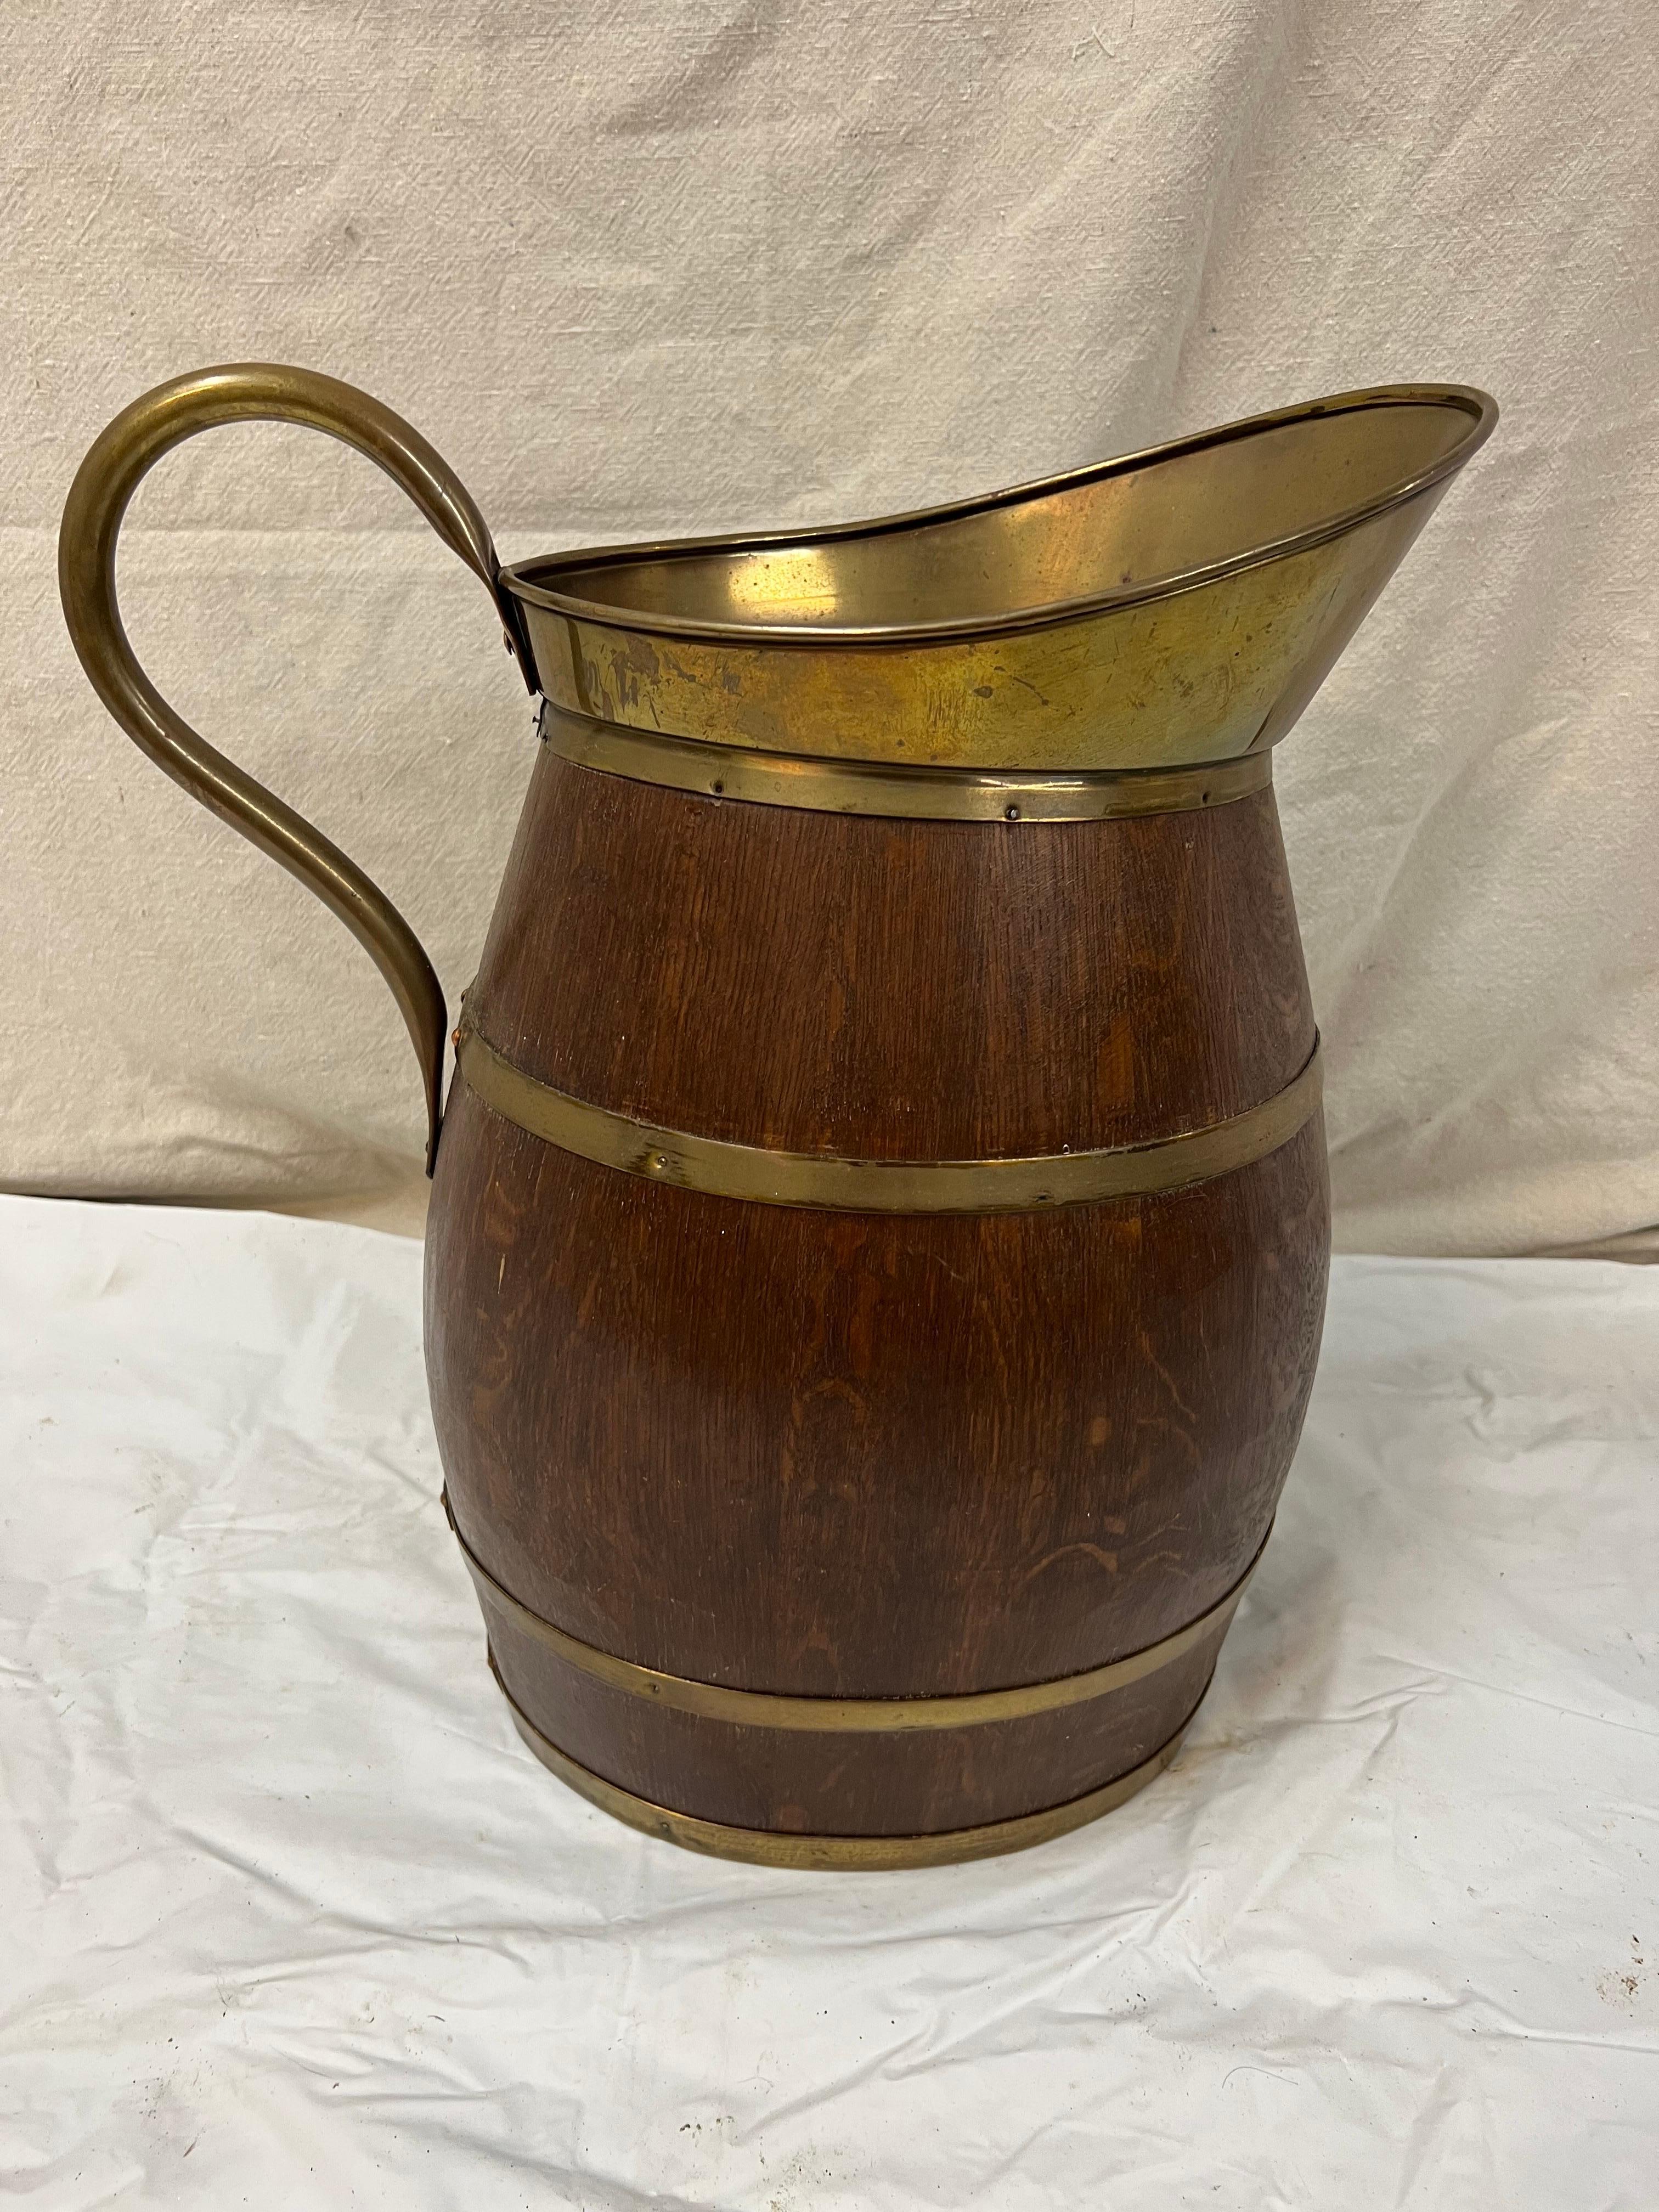 Large antique oak and brass Barrell or umbrella holder. Lovely quarter sawn oak with polished brass trim. Please confirm the dimensions prior to purchase.